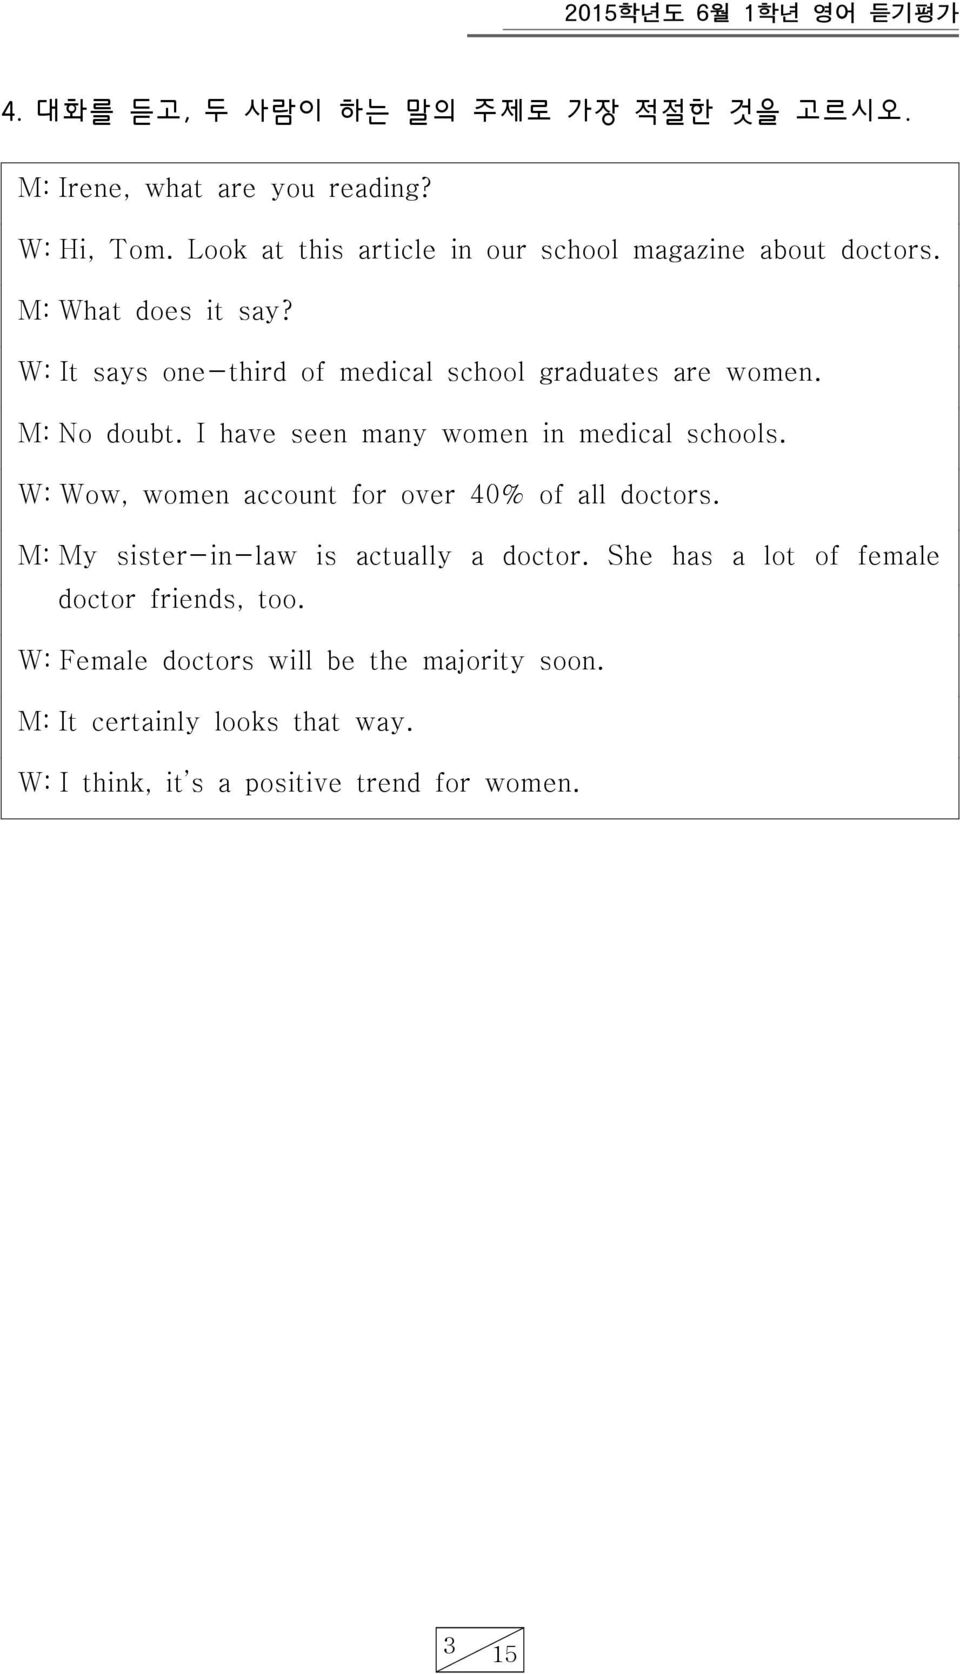 W: It says one-third of medical school graduates are women. M: No doubt. I have seen many women in medical schools.